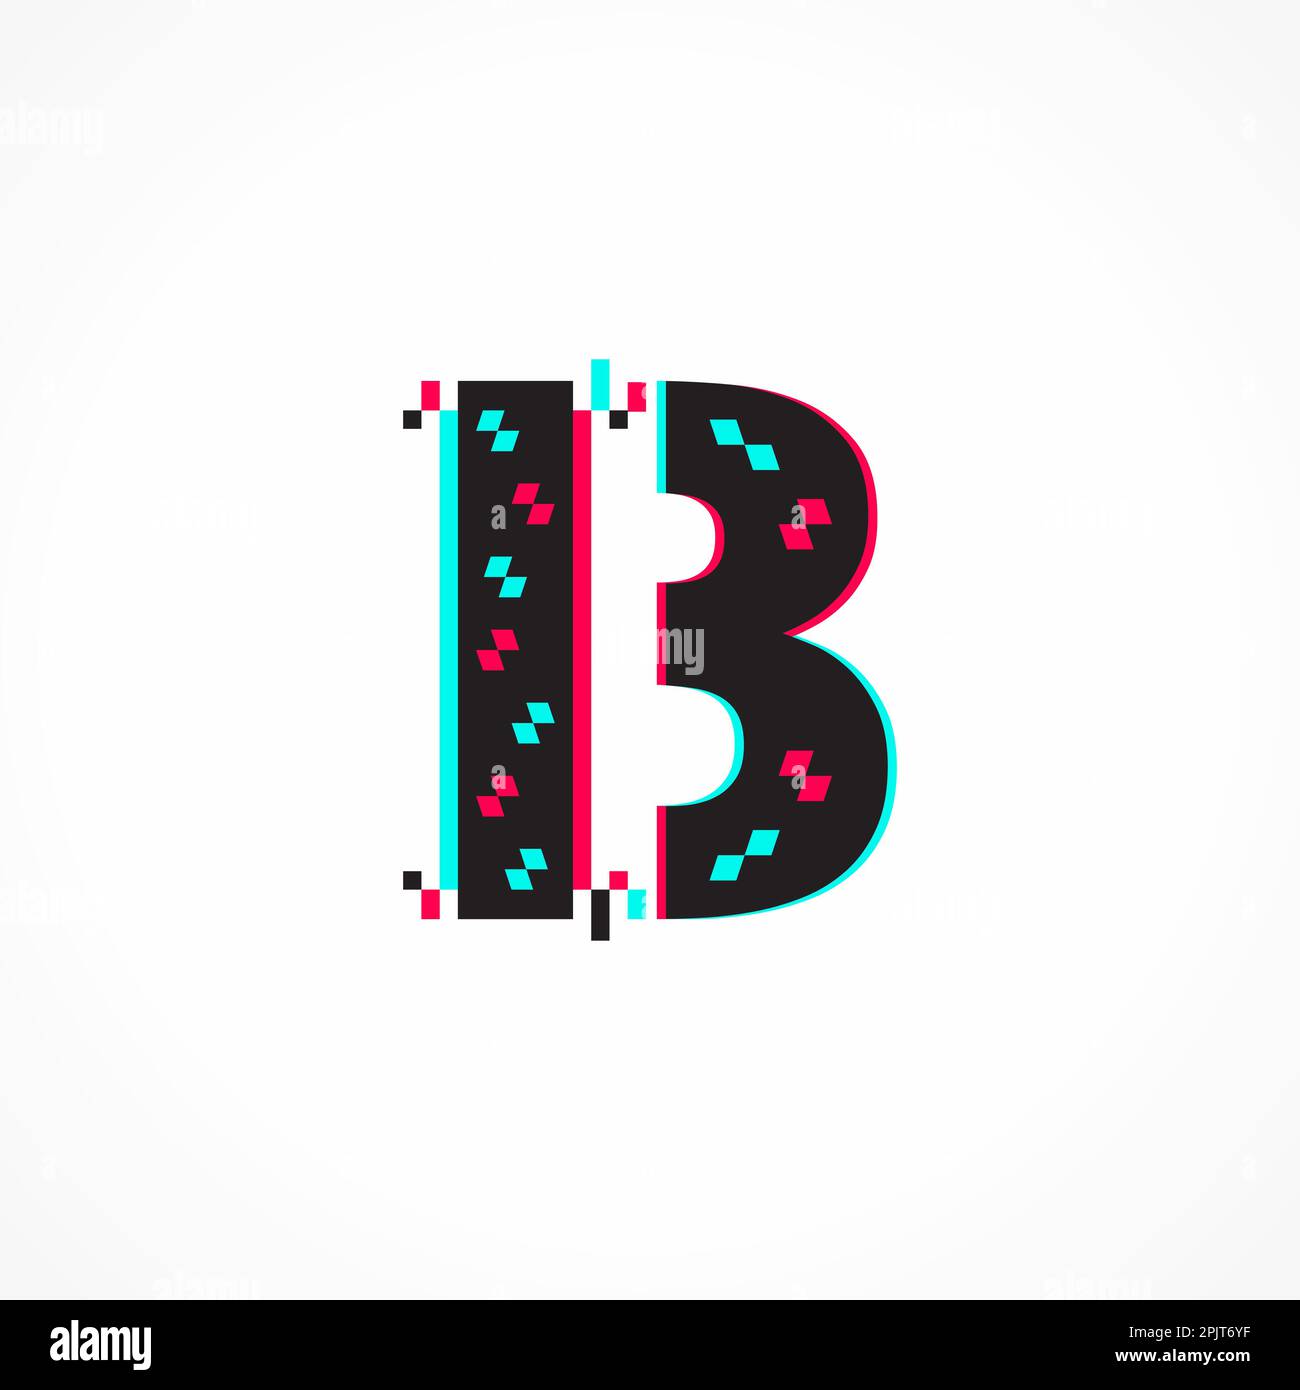 Abstract Glitch Effect Corporate Identity Letter B Logo Design Stock Vector